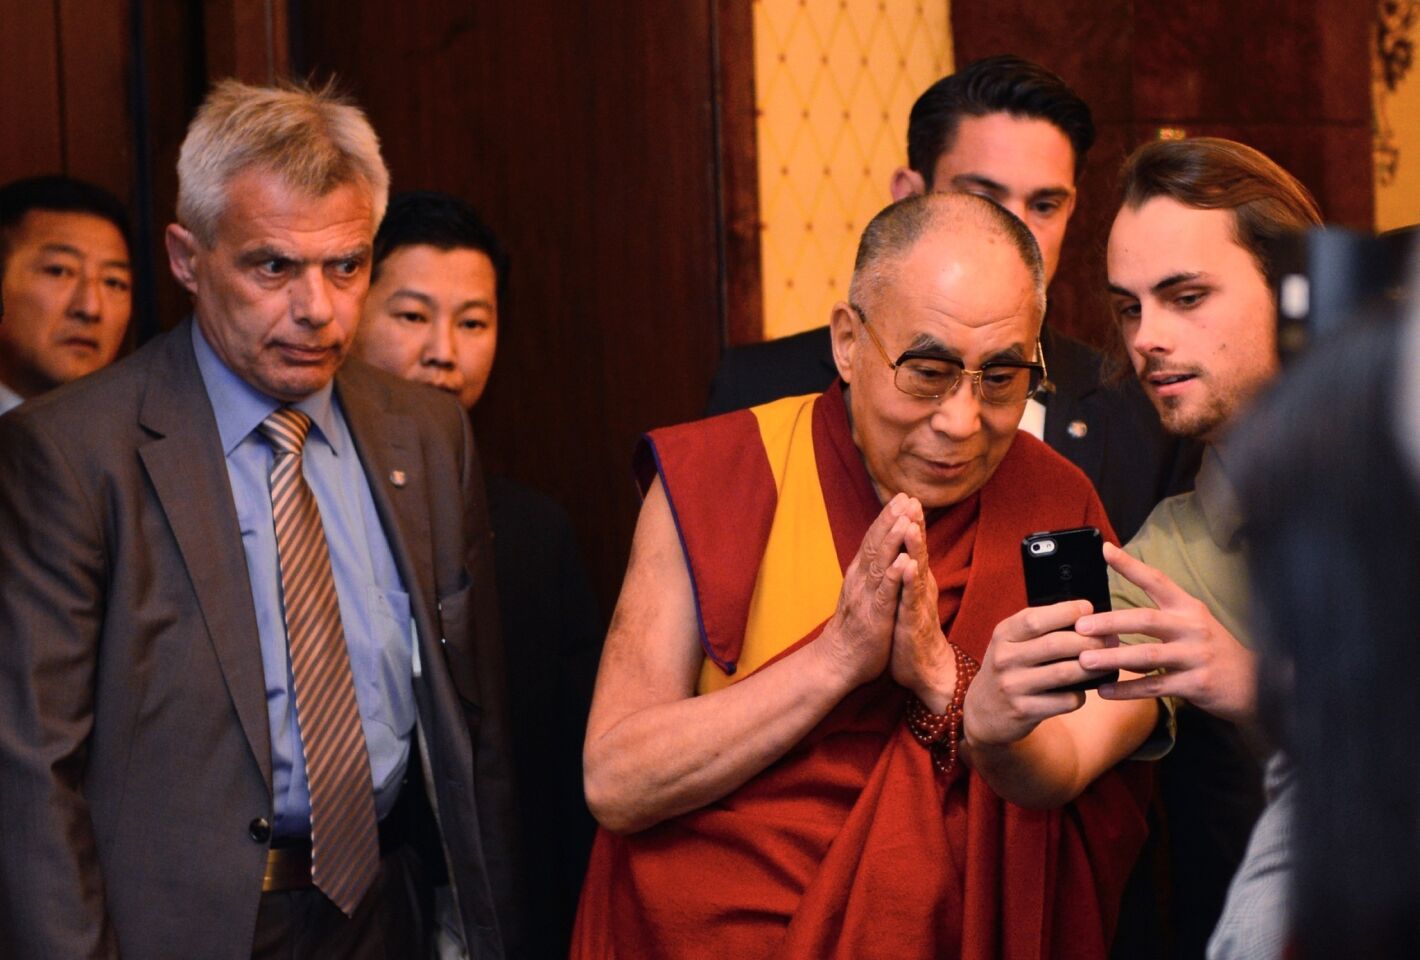 A visitor takes a selfie with the Dalai Lama as he arrives for a press conference on May 14, 2014, in Frankfurt, Germany.